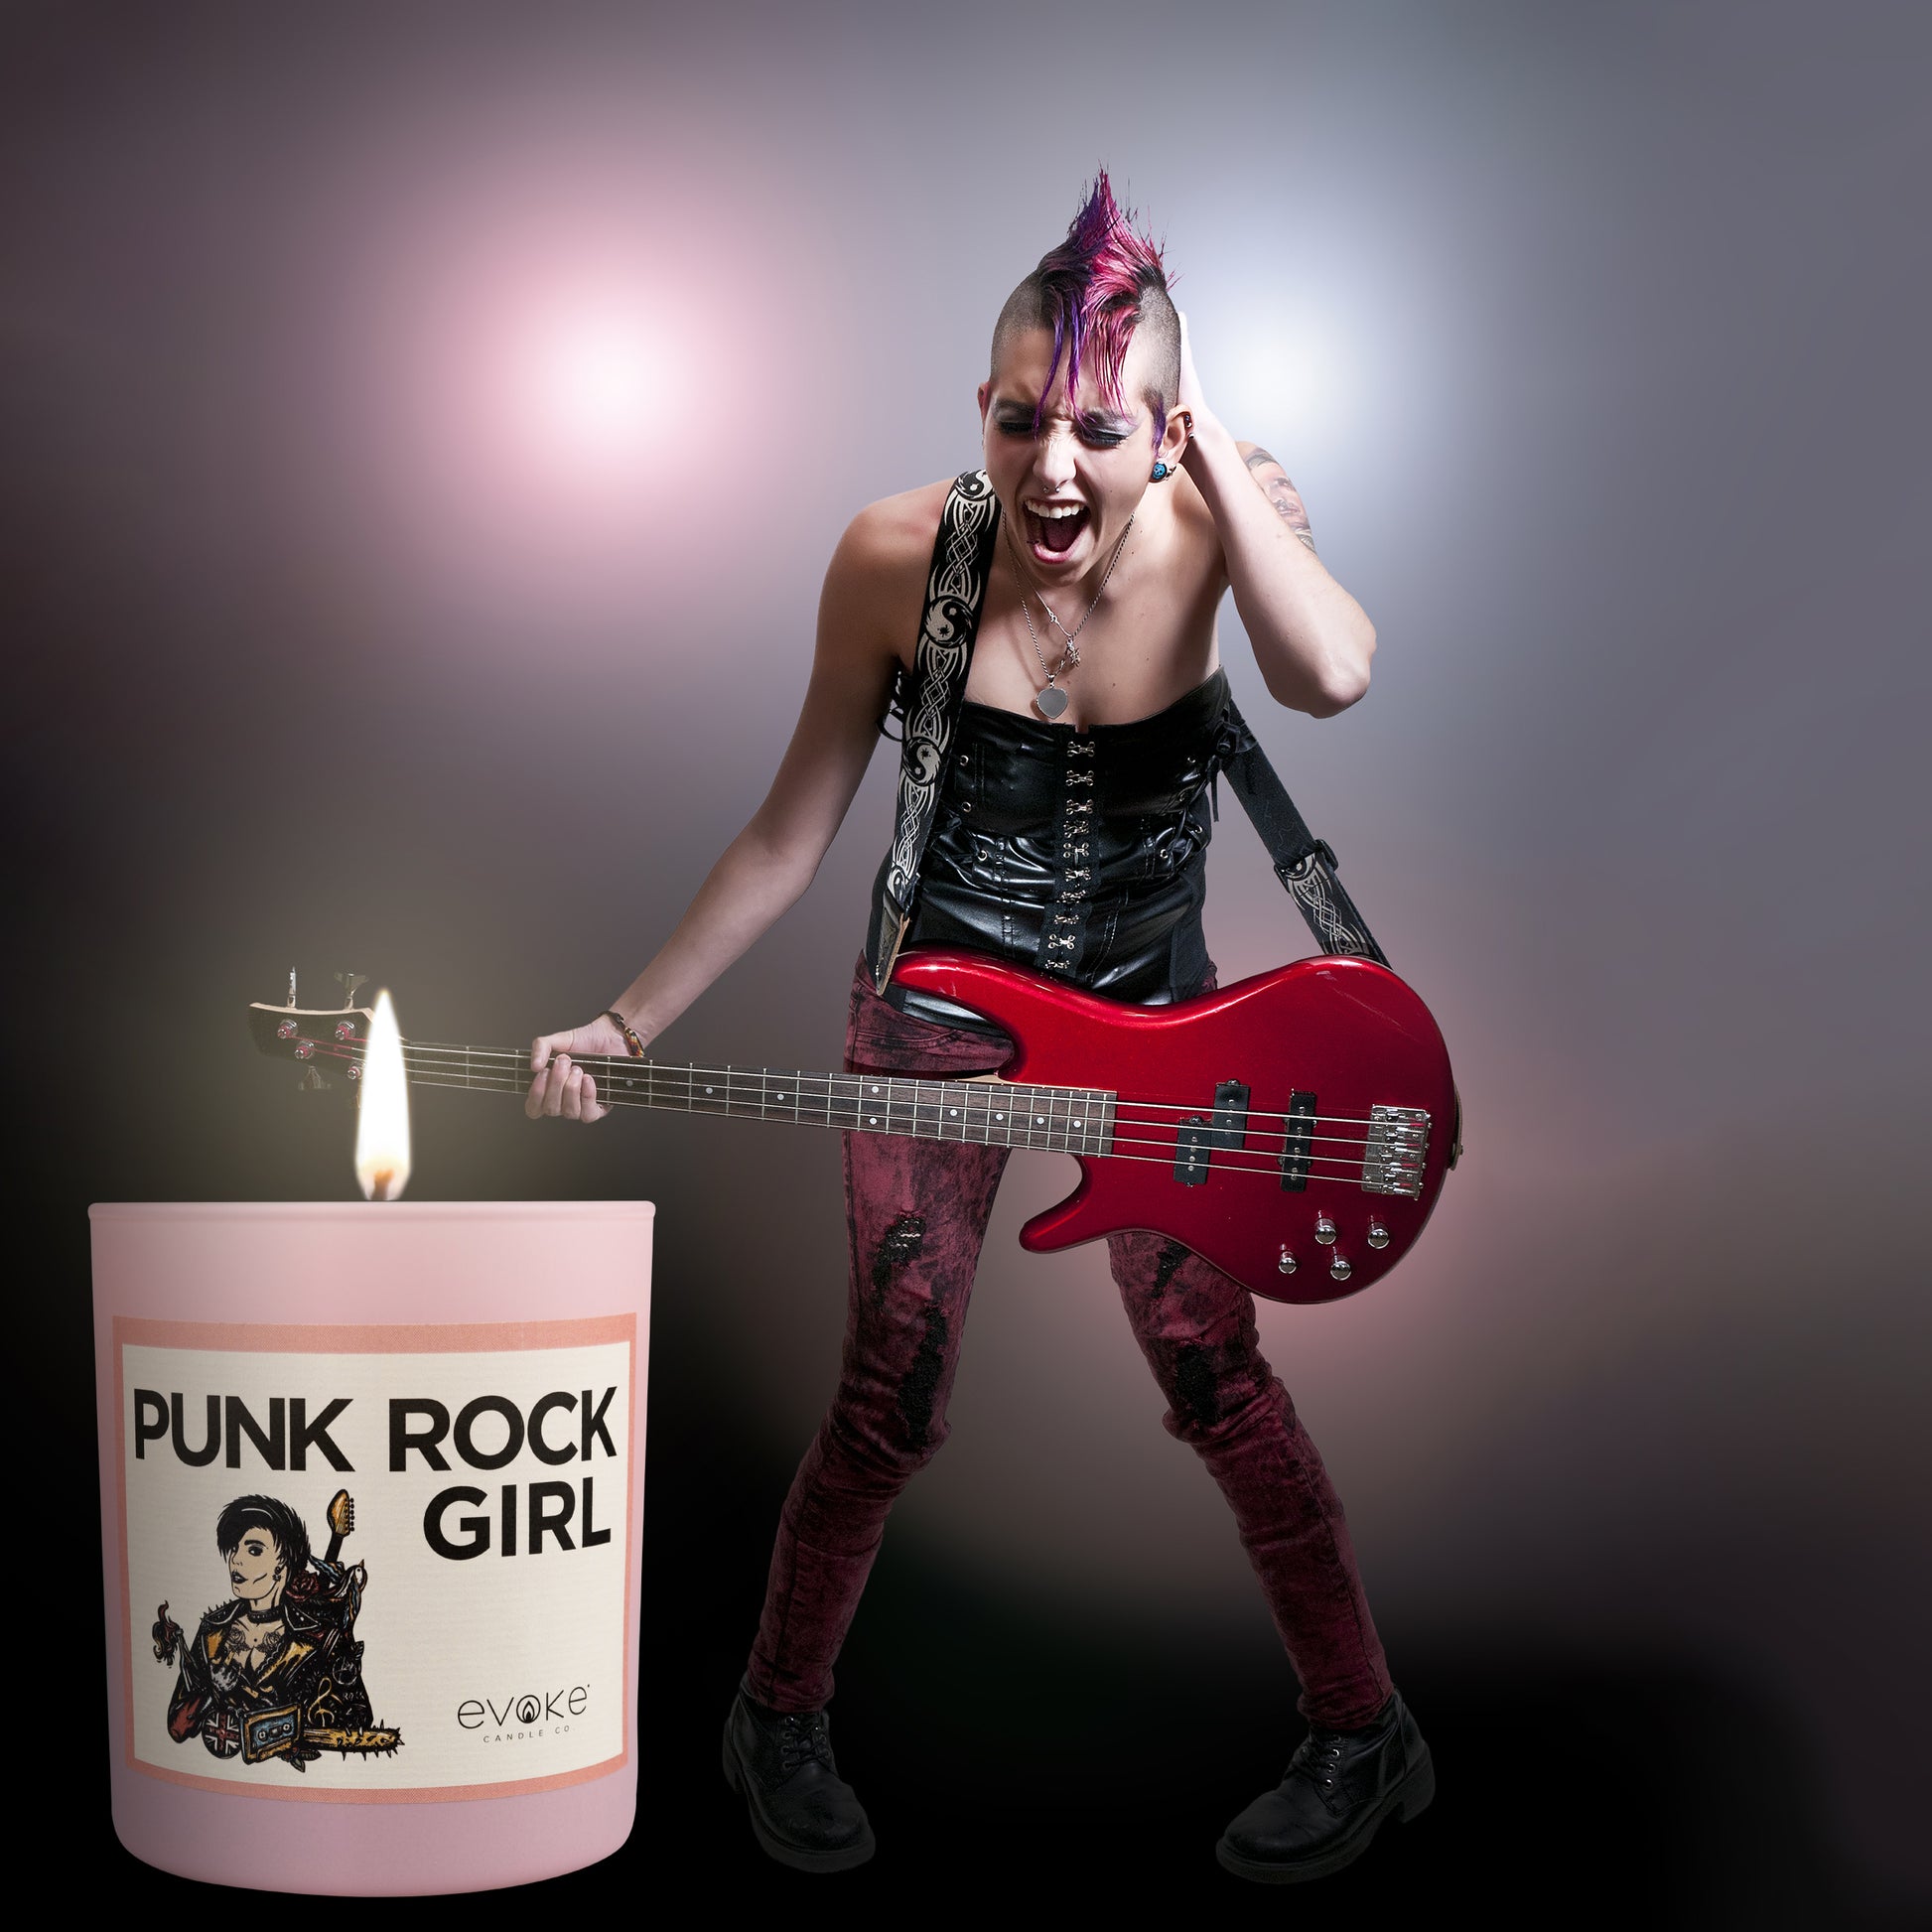 Punk Rock Girl - The Girl Collection - Evoke Candle Co